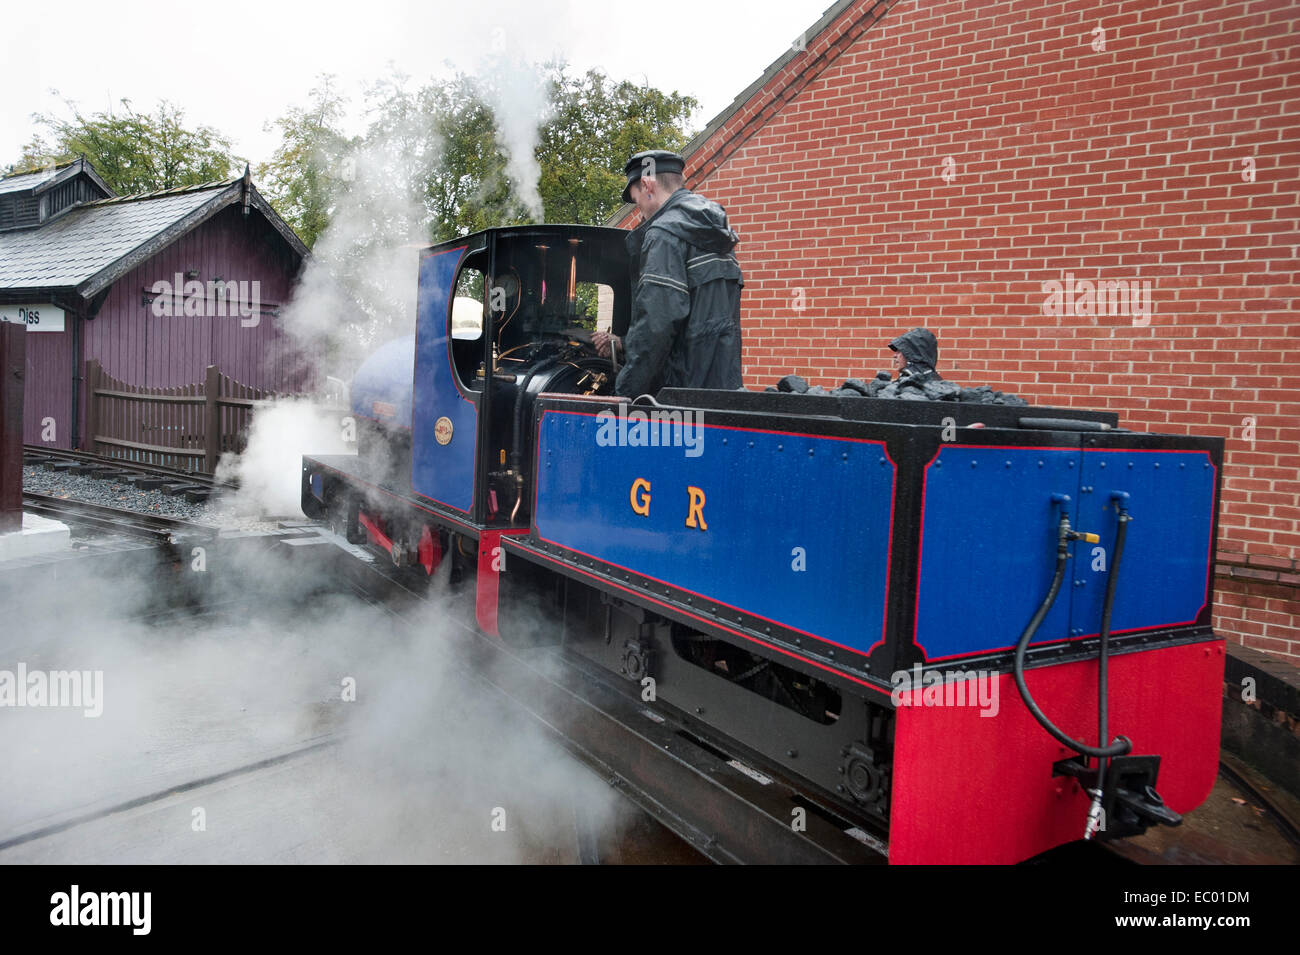 The Driver of 10 and a 1/4 inch gauge Steam locomotive No 1 'Alan Bloom' uses his injectors as he moves his engine on the Garden Line Stock Photo